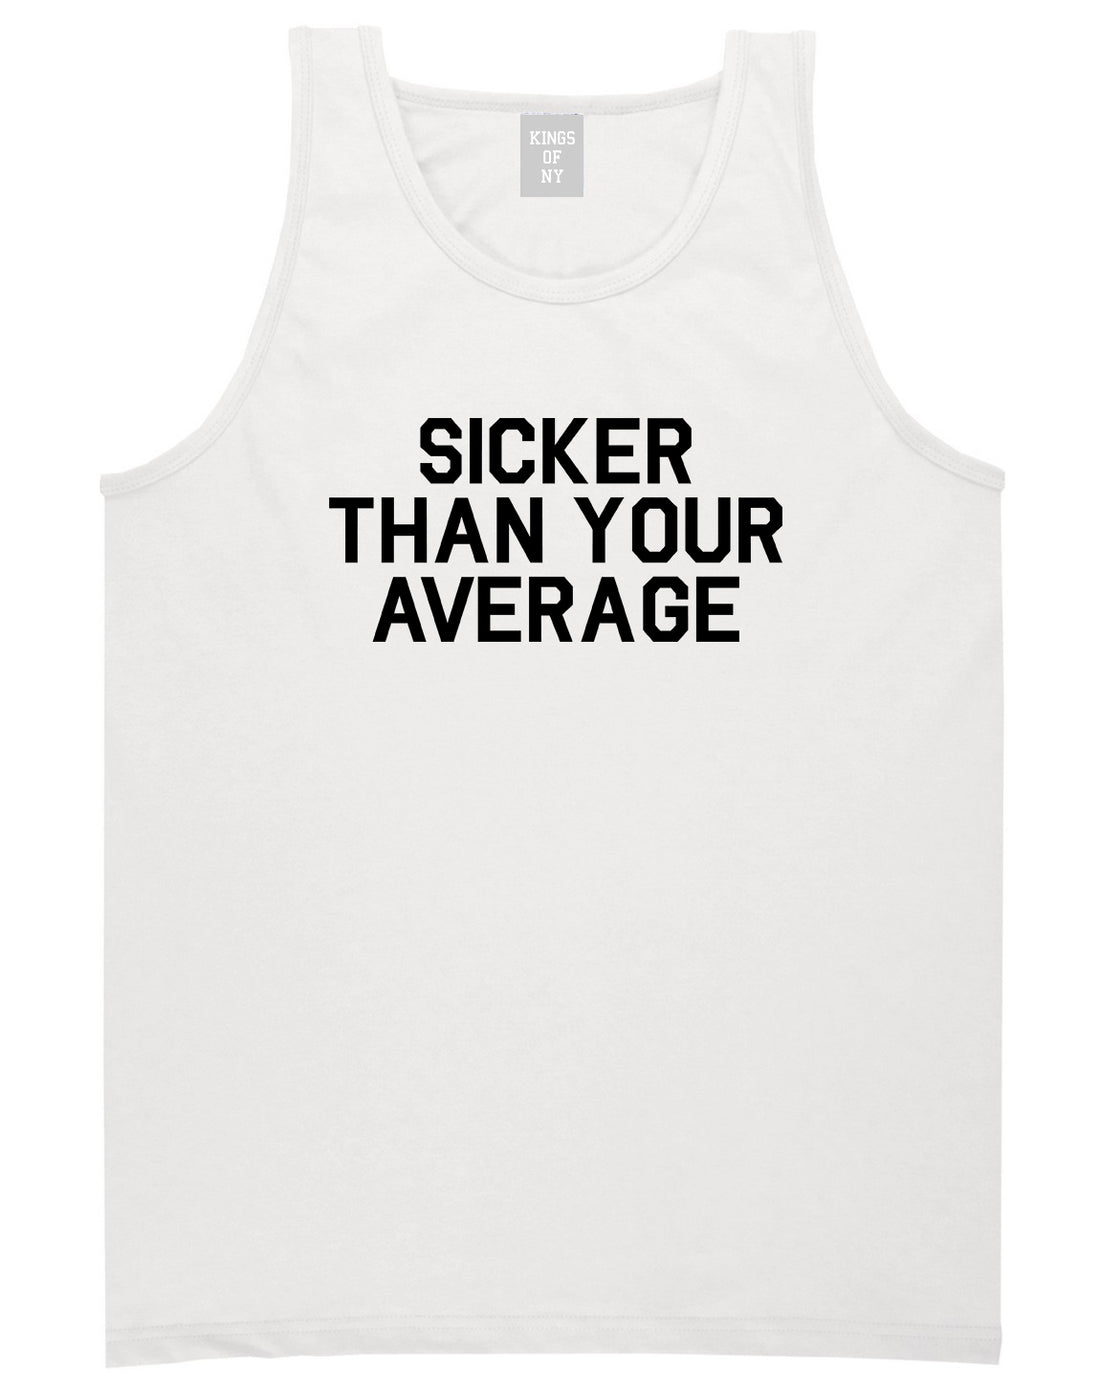 Sicker Than Your Average Tank Top Shirt in White